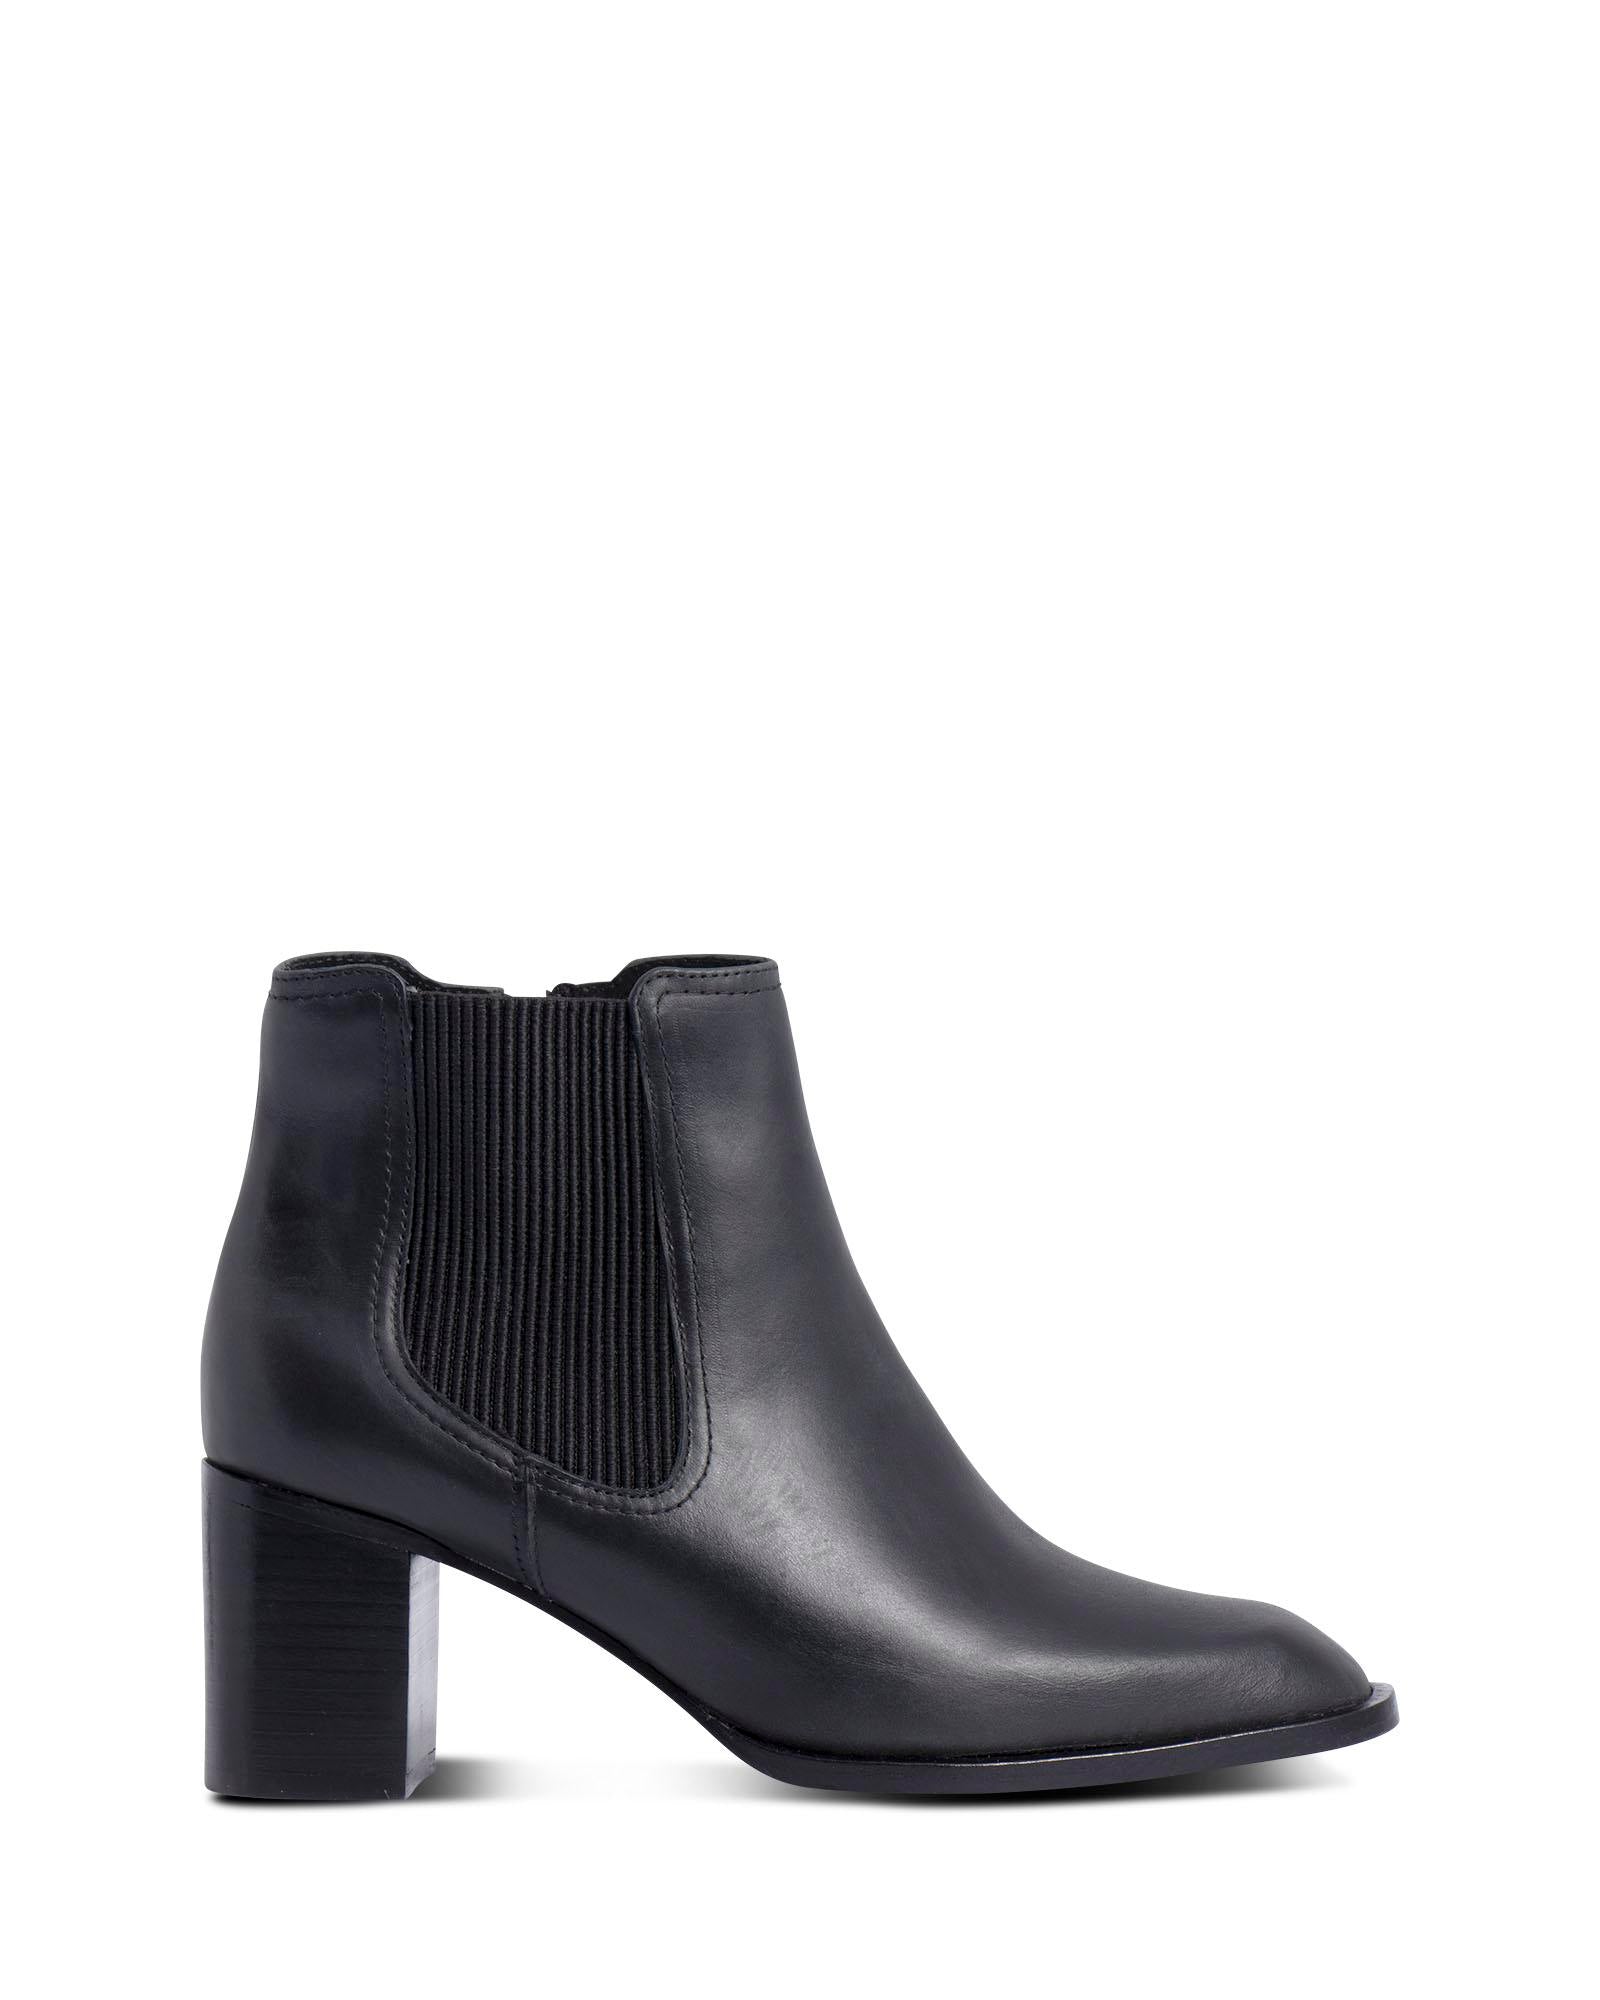 Eleanore Black 7cm Ankle Boot